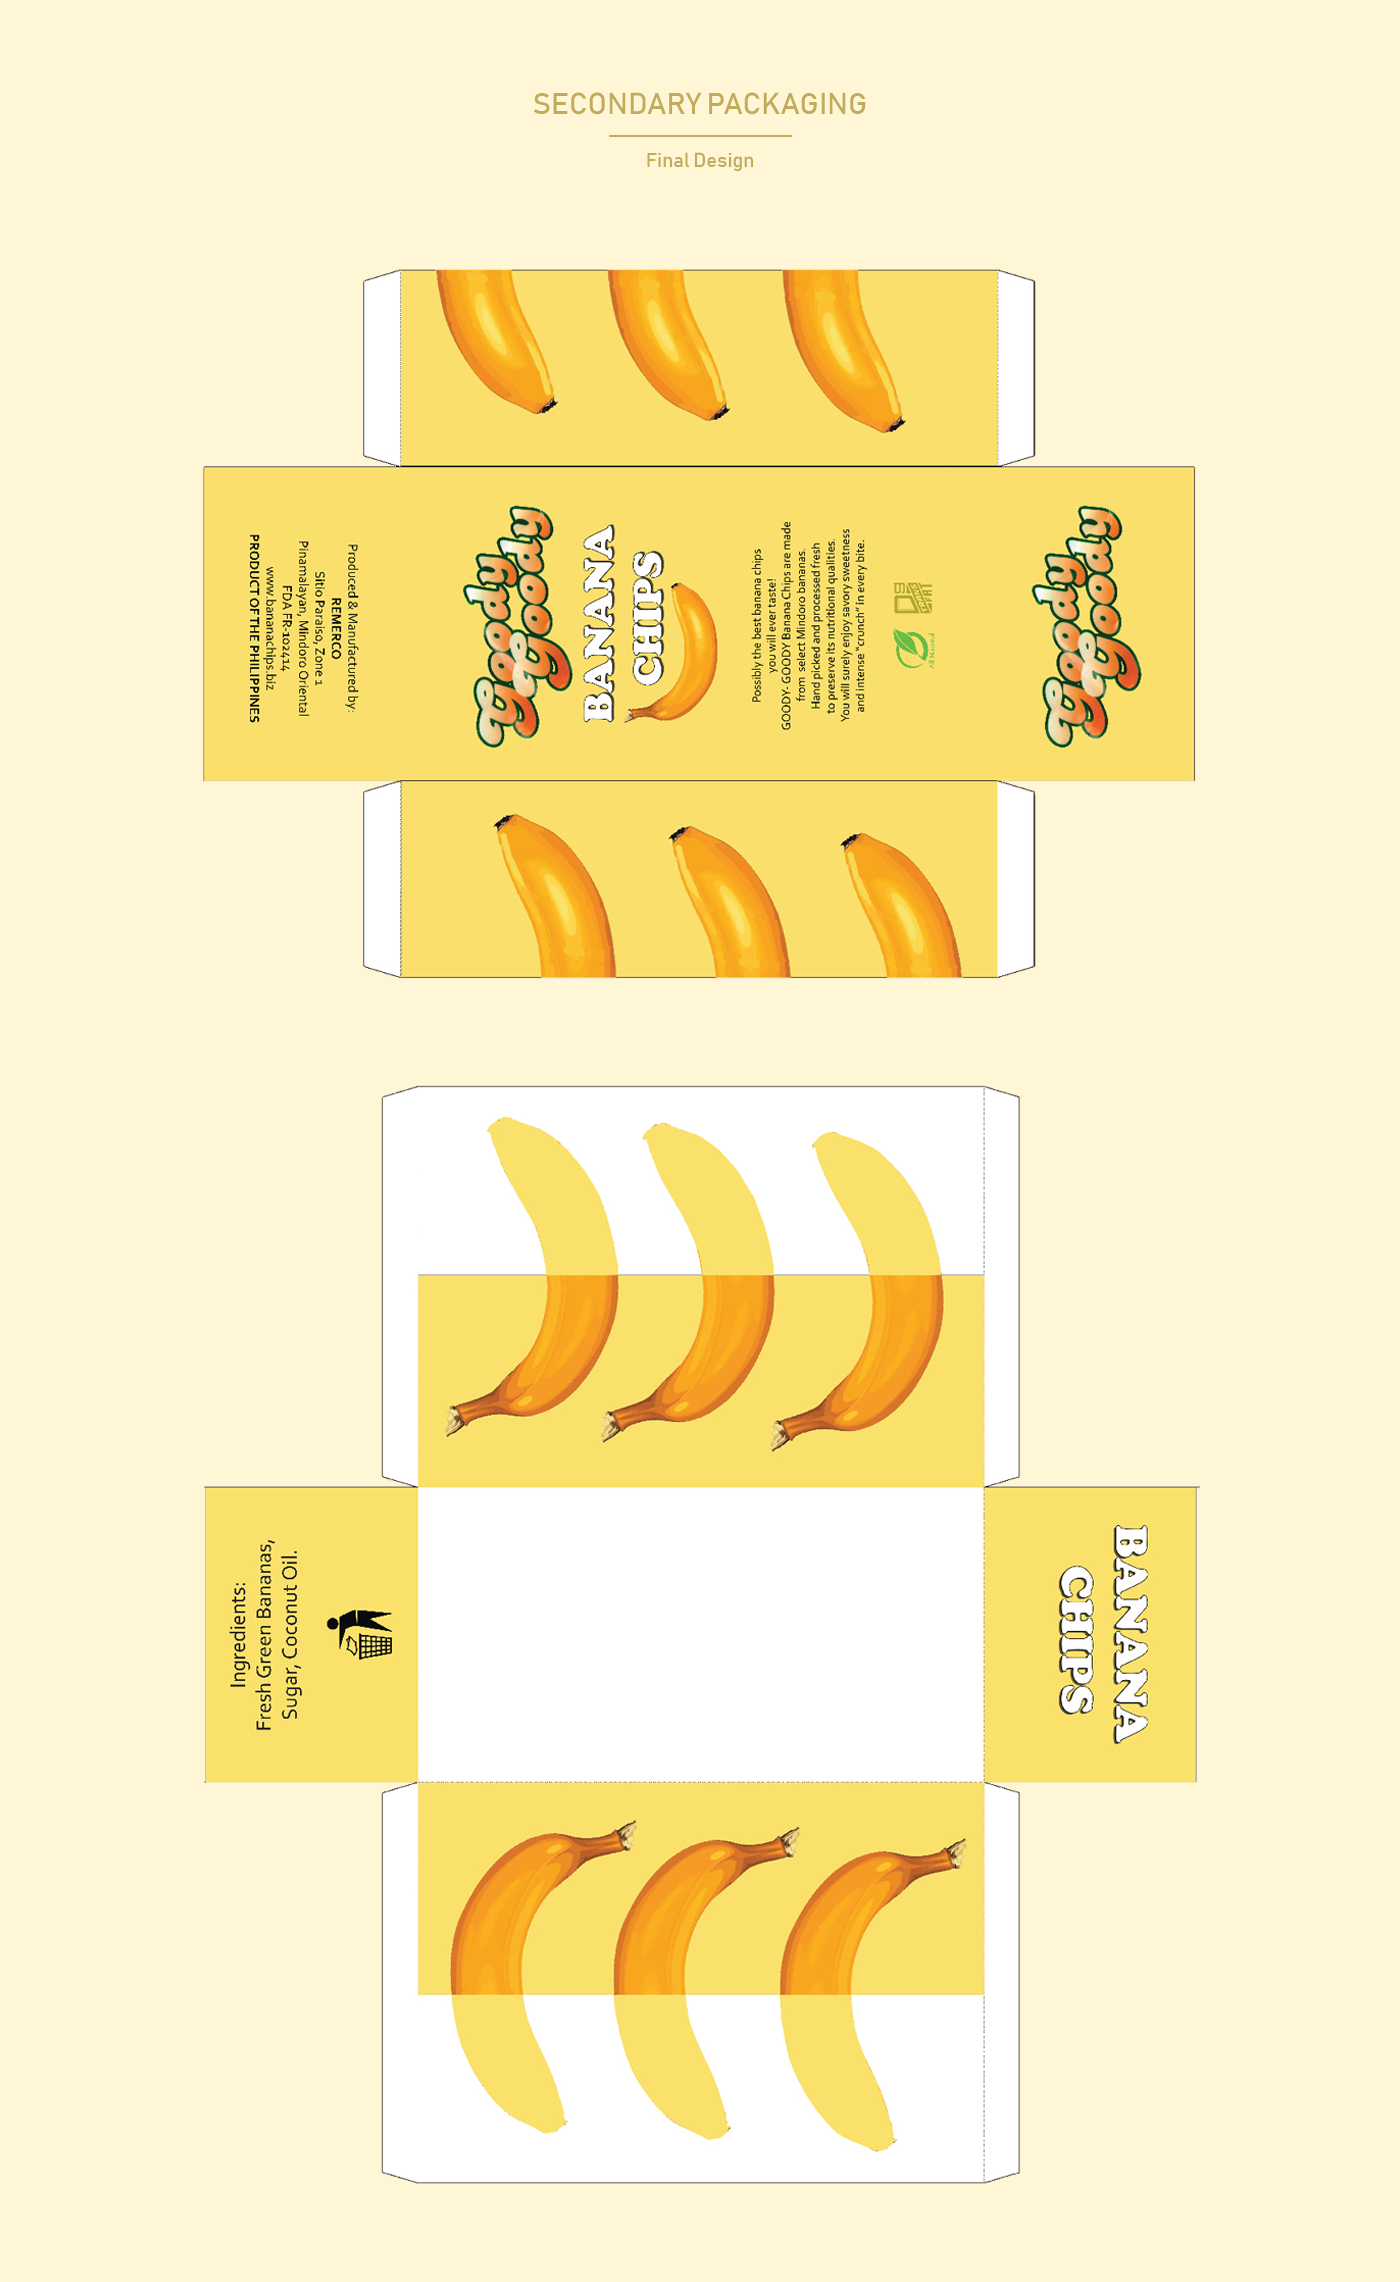 Banana Chips Packaging banana box Philiippines local product chips Trans Fat nutrition facts UST CFAD